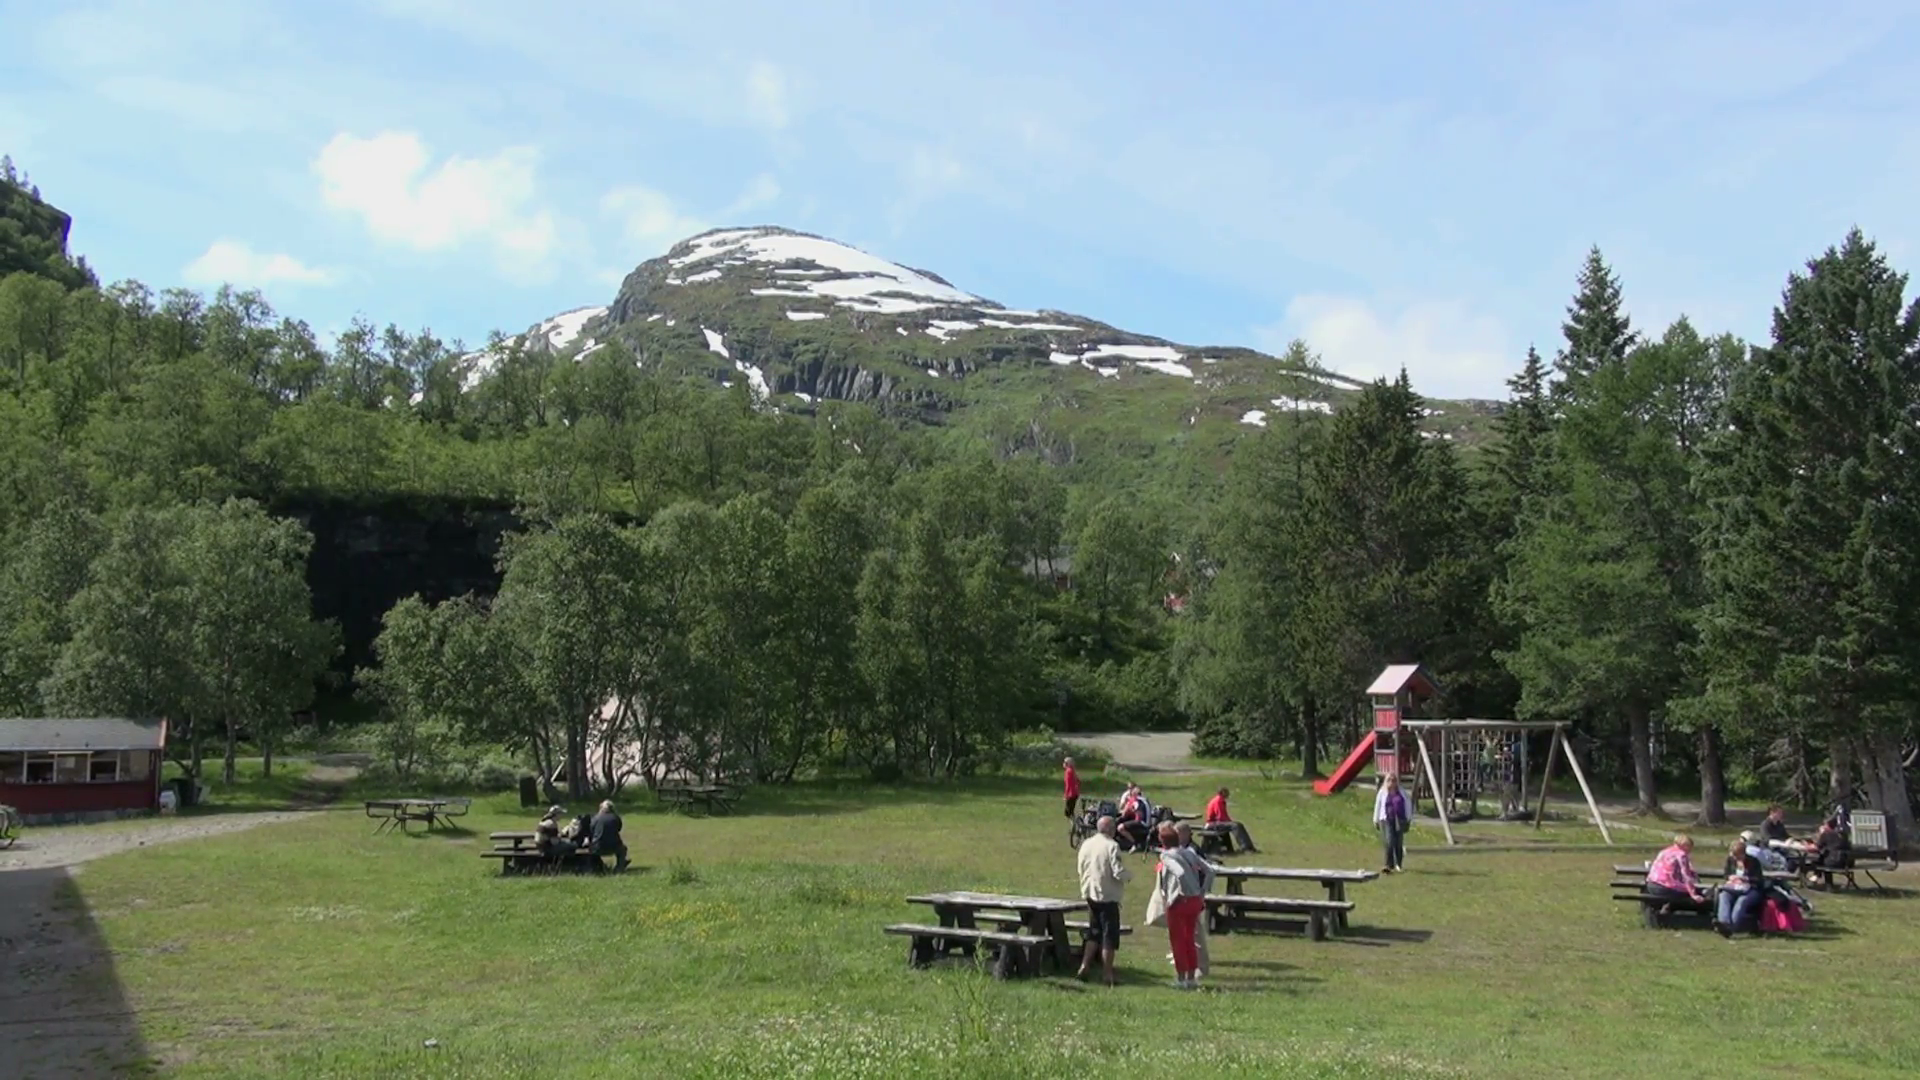 People Picnicing Above Flam Stock Video Footage - VideoBlocks